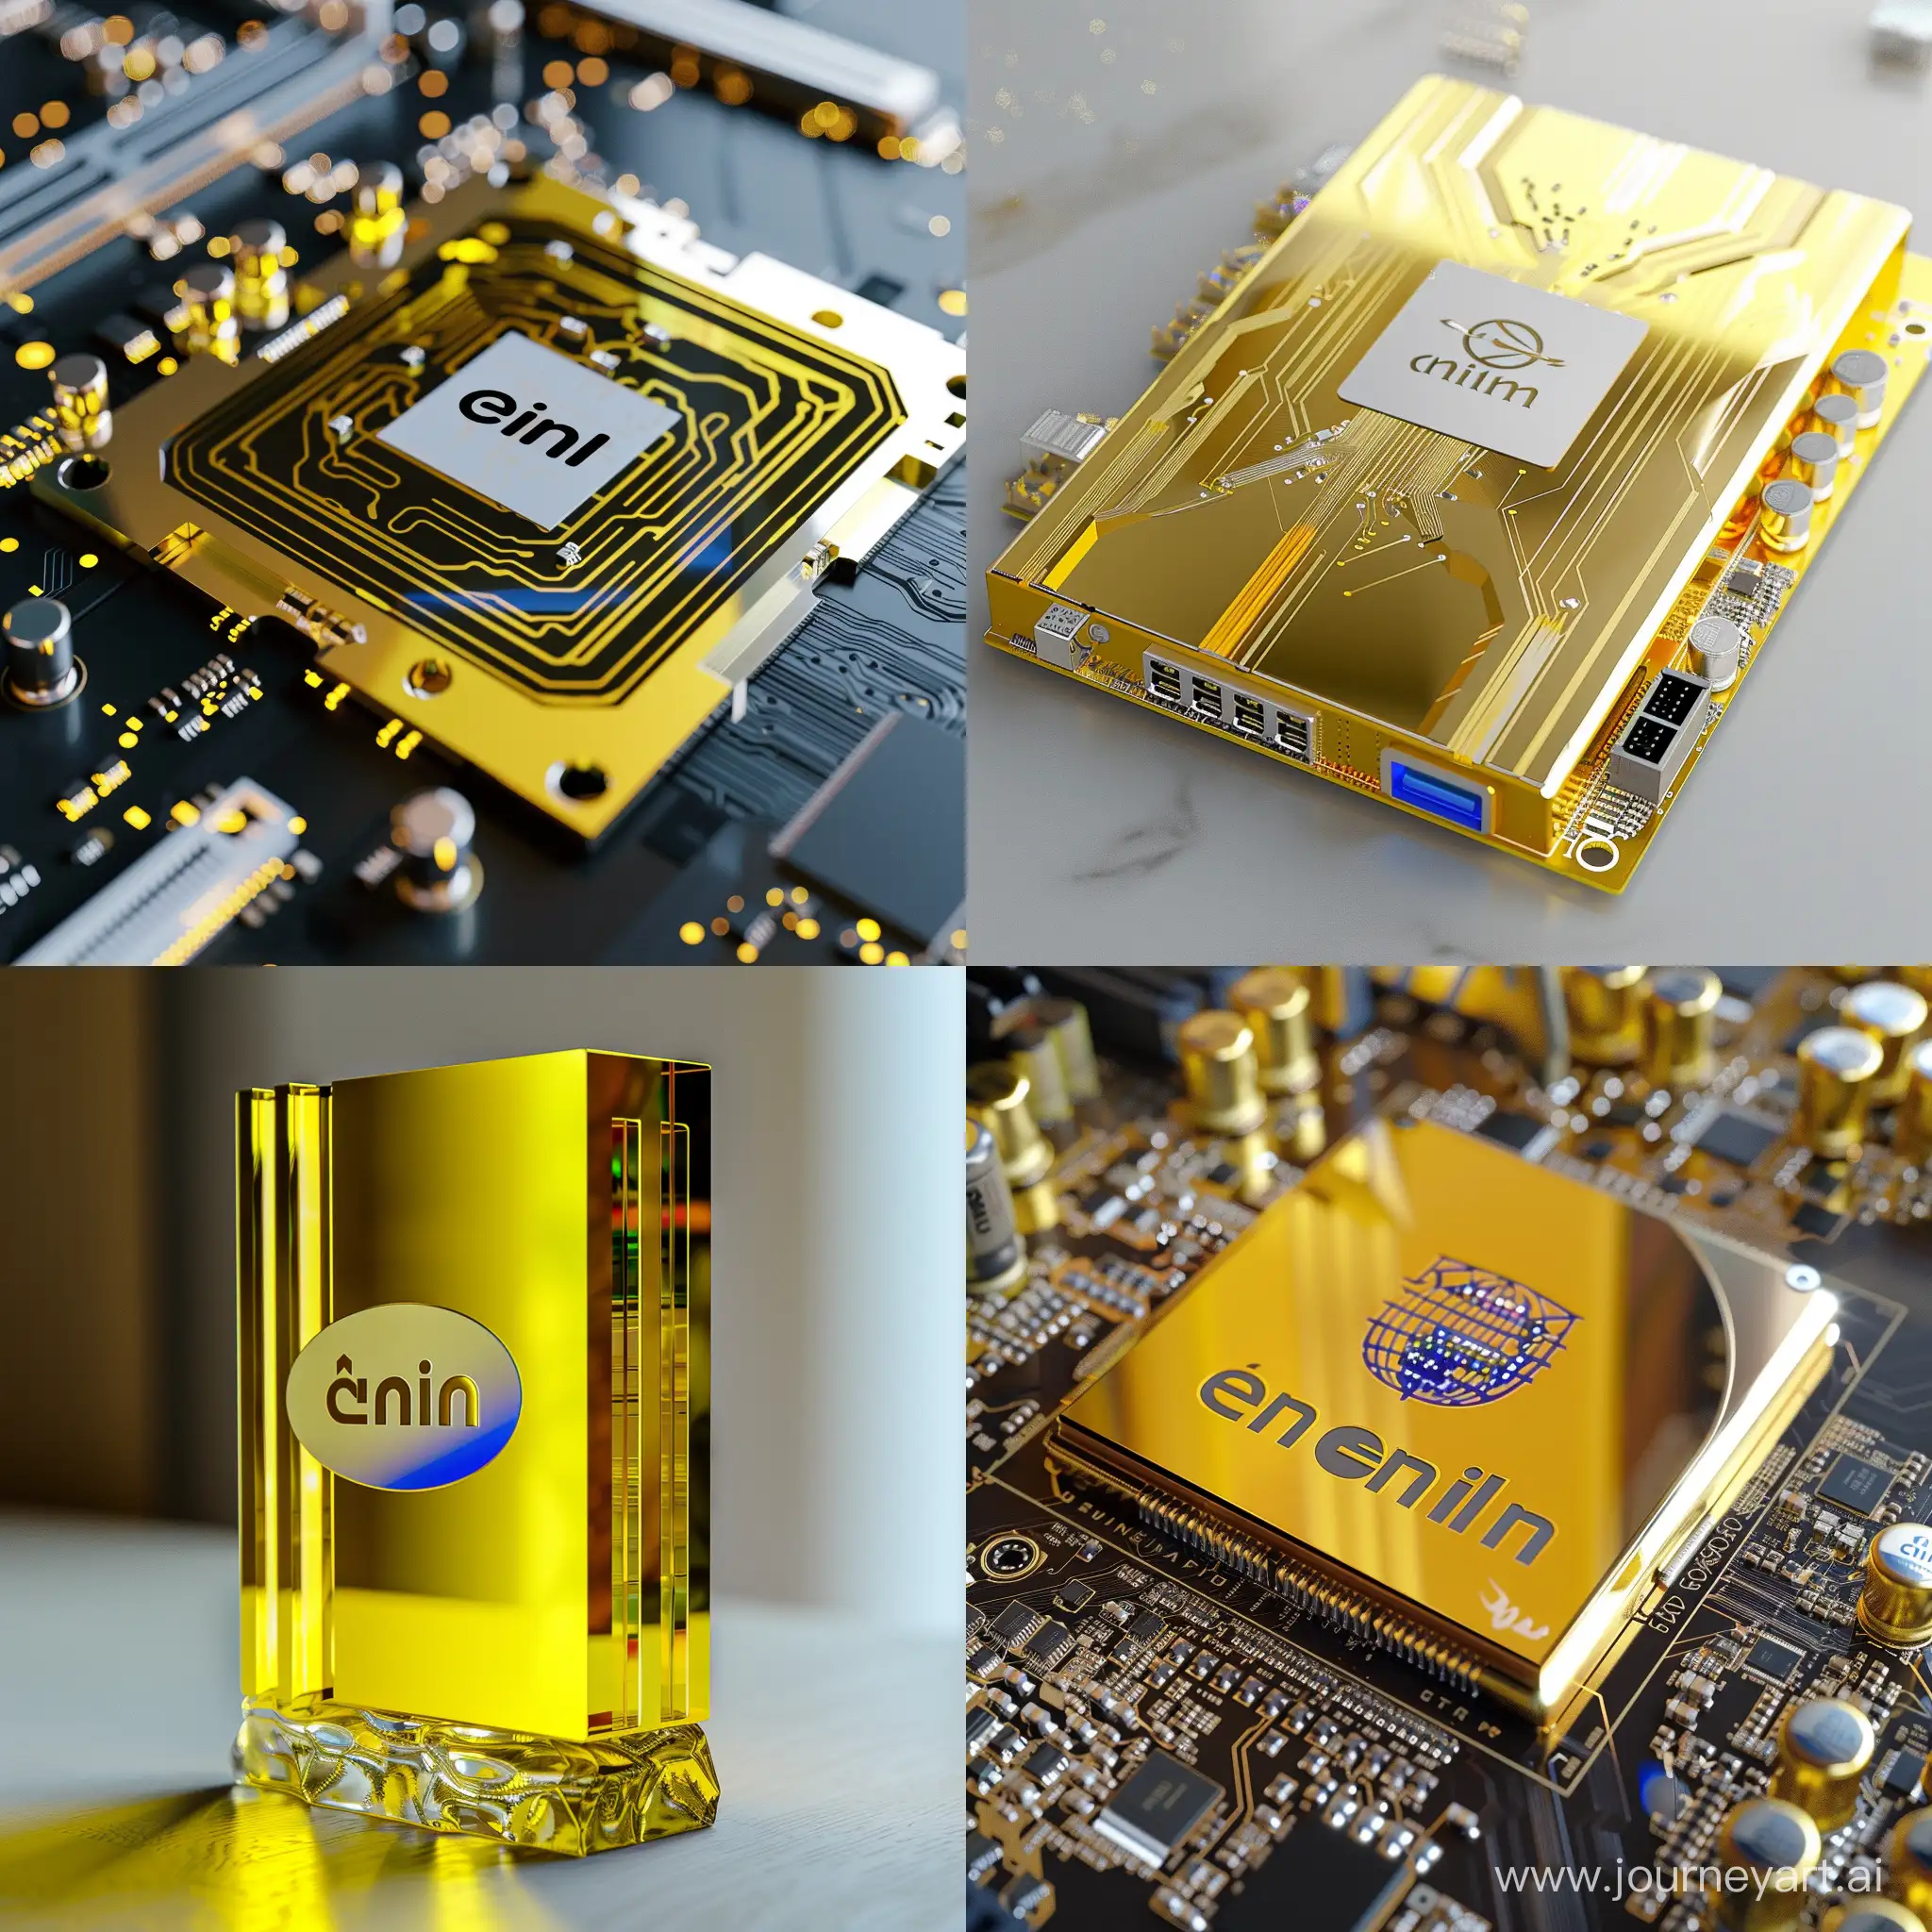 Intel CPU is a combination of yellow and white gold alloy and glass and matte background    Please only write the Intel logo on the cpu